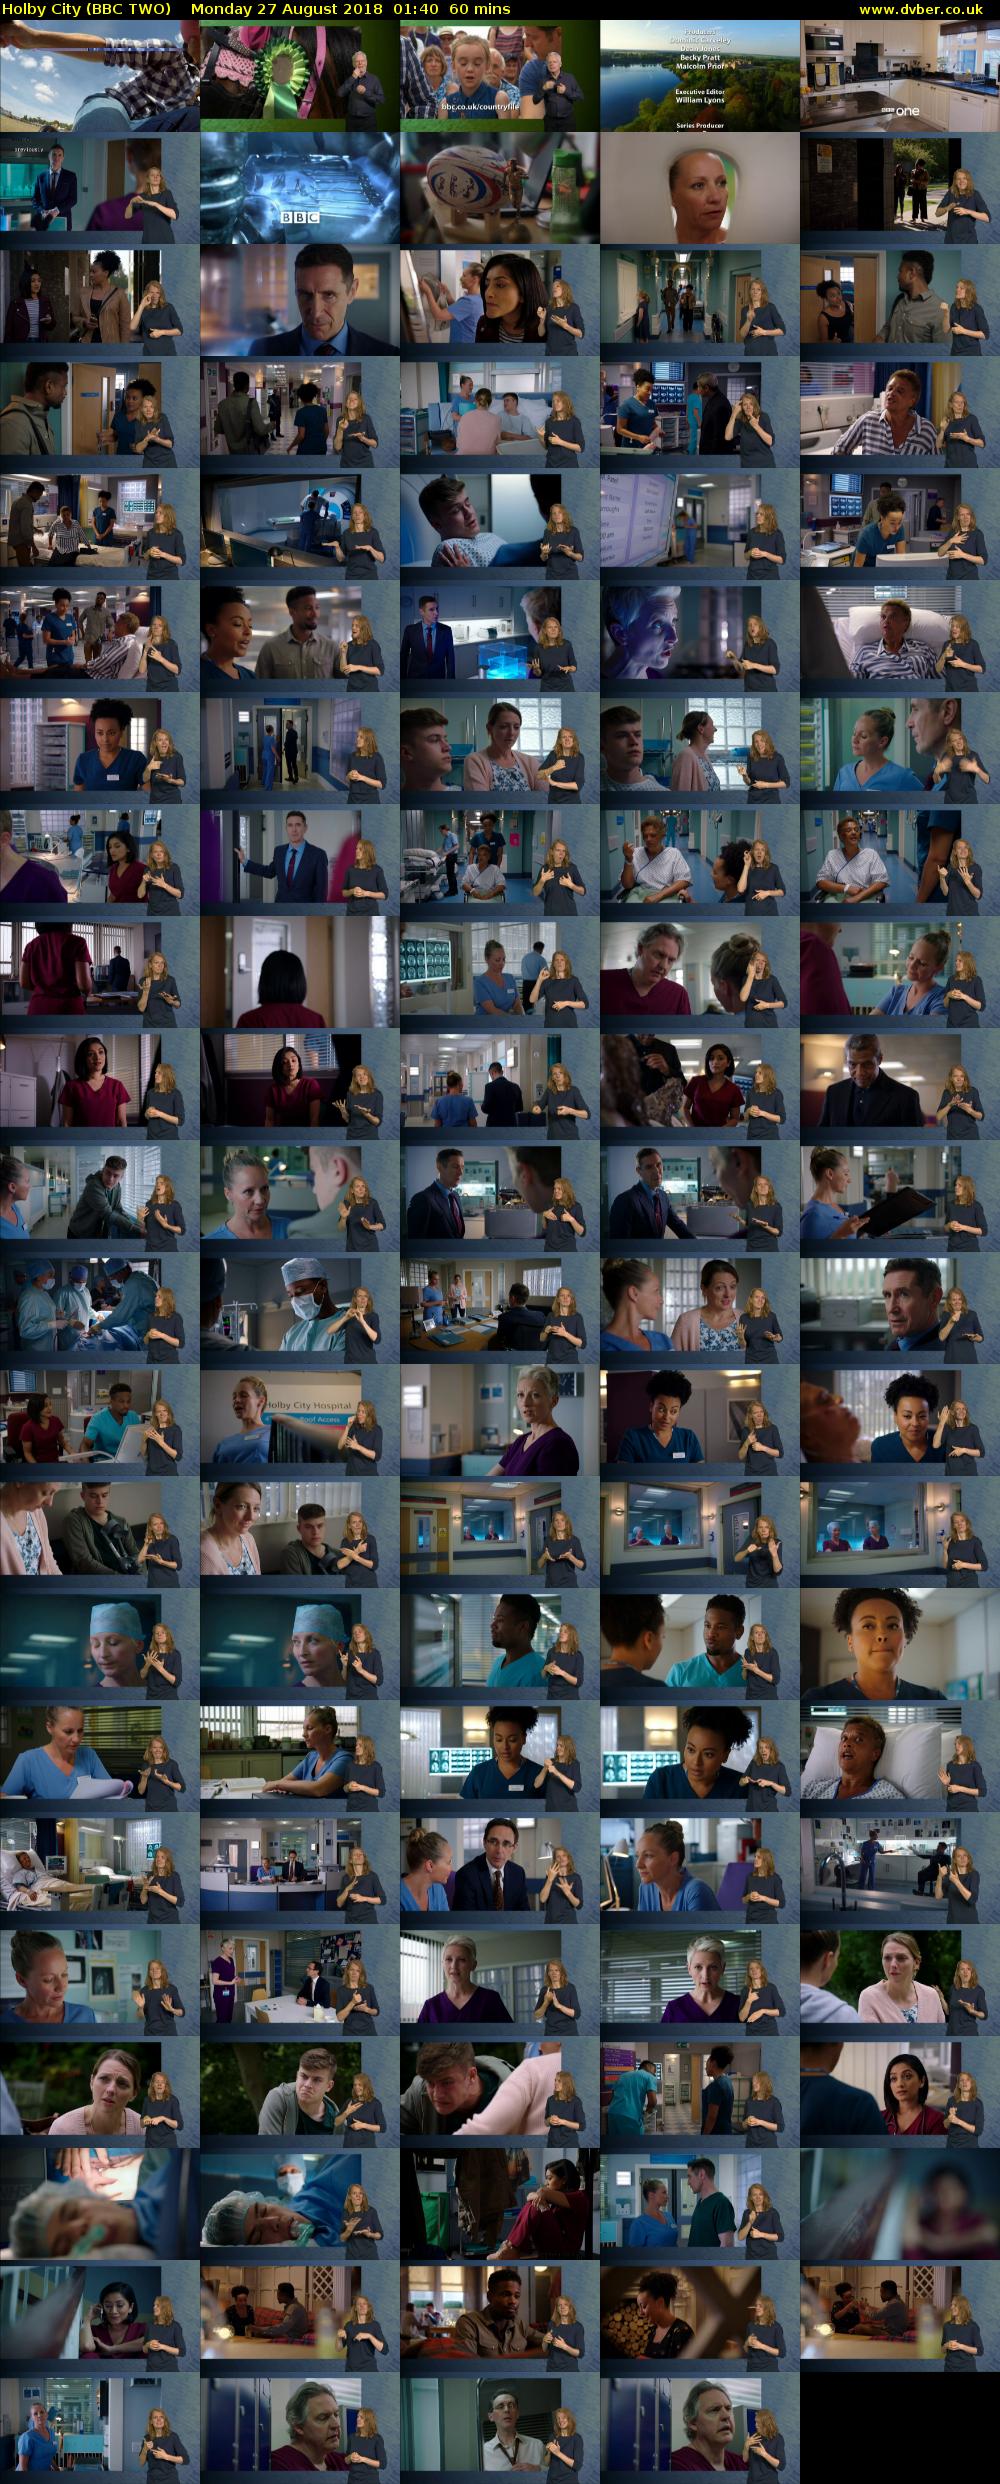 Holby City (BBC TWO) Monday 27 August 2018 01:40 - 02:40